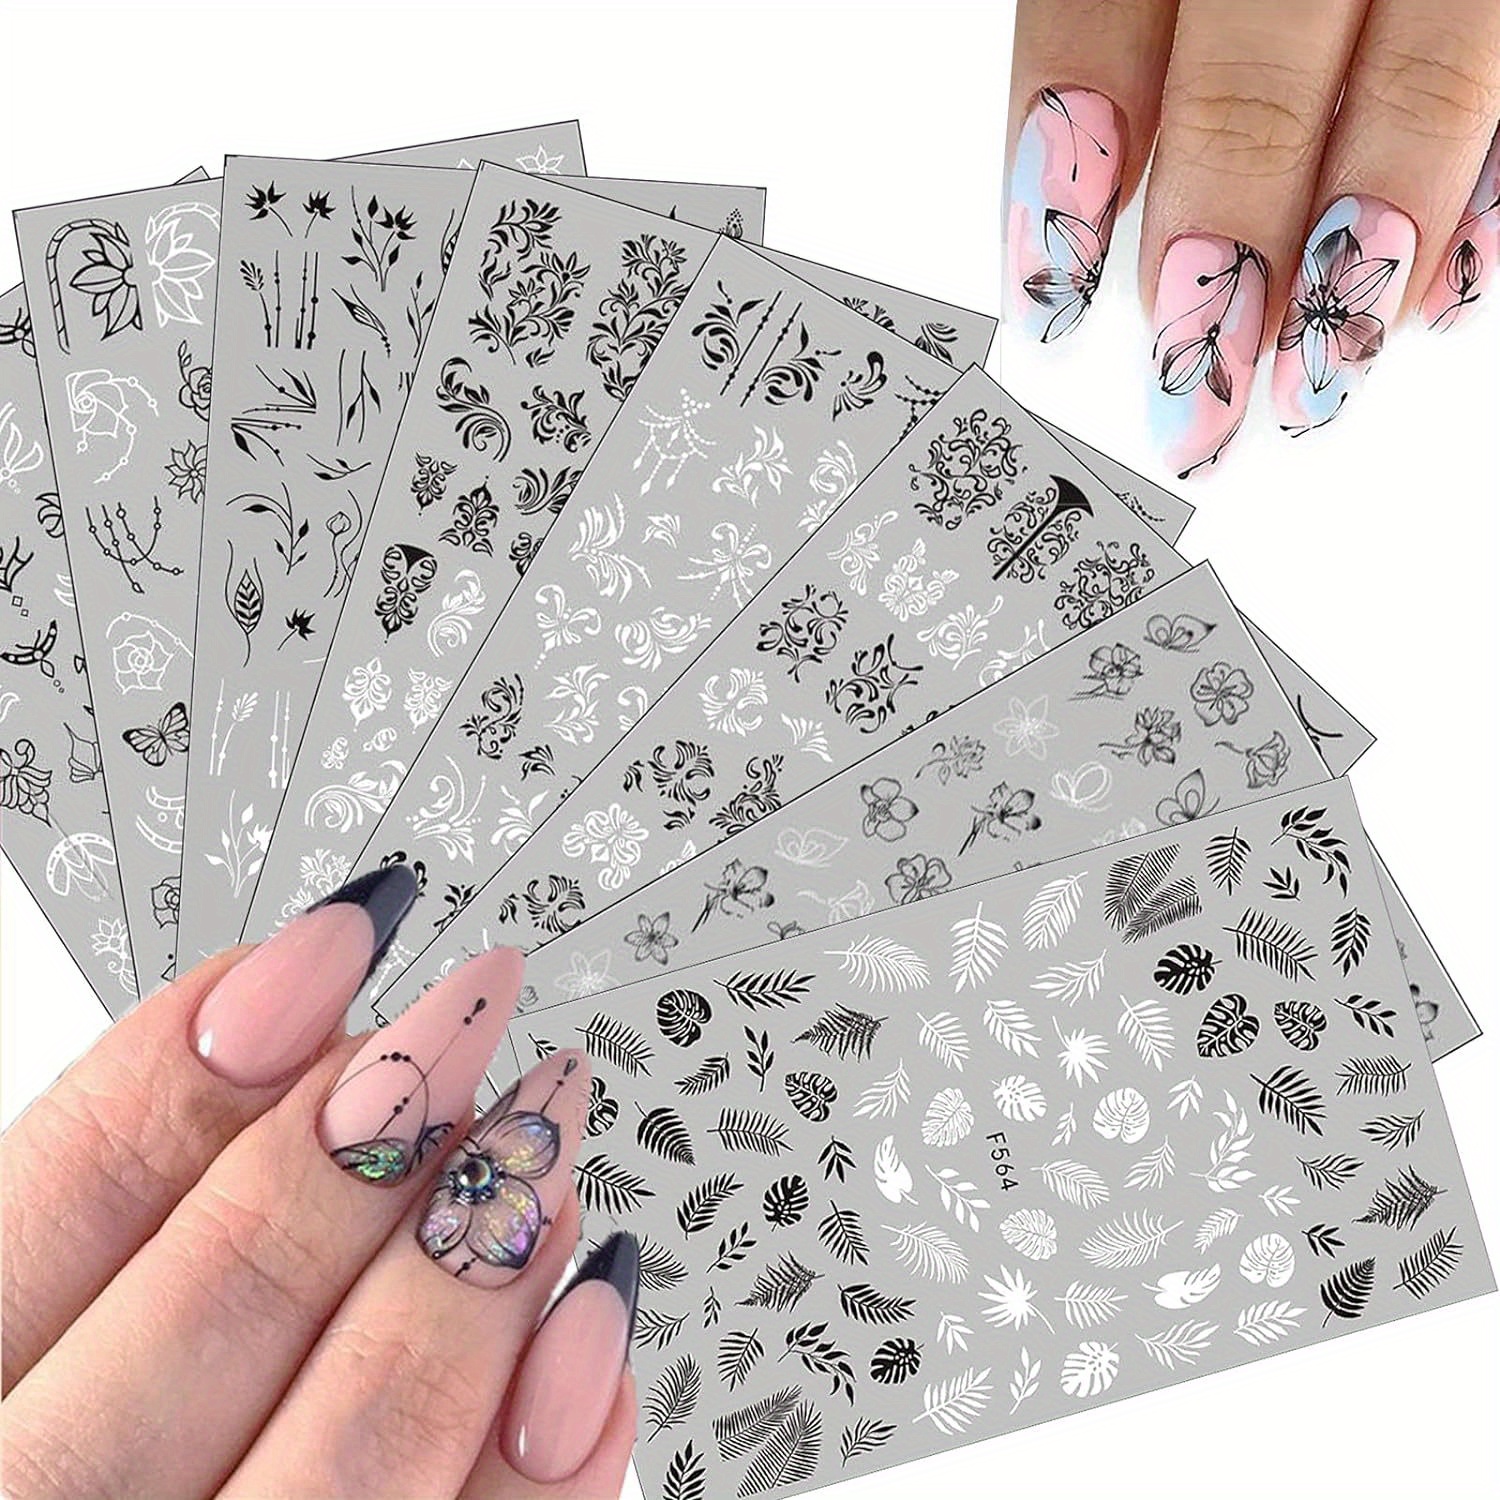 

8 Sheets Black White Nail Art Stickers Decals 3d Leaves Retro Flower Vine Pattern Nail Decals French Classic Simple Self Adhesive Sticker For Women Girls Nails Art Nail Decoration